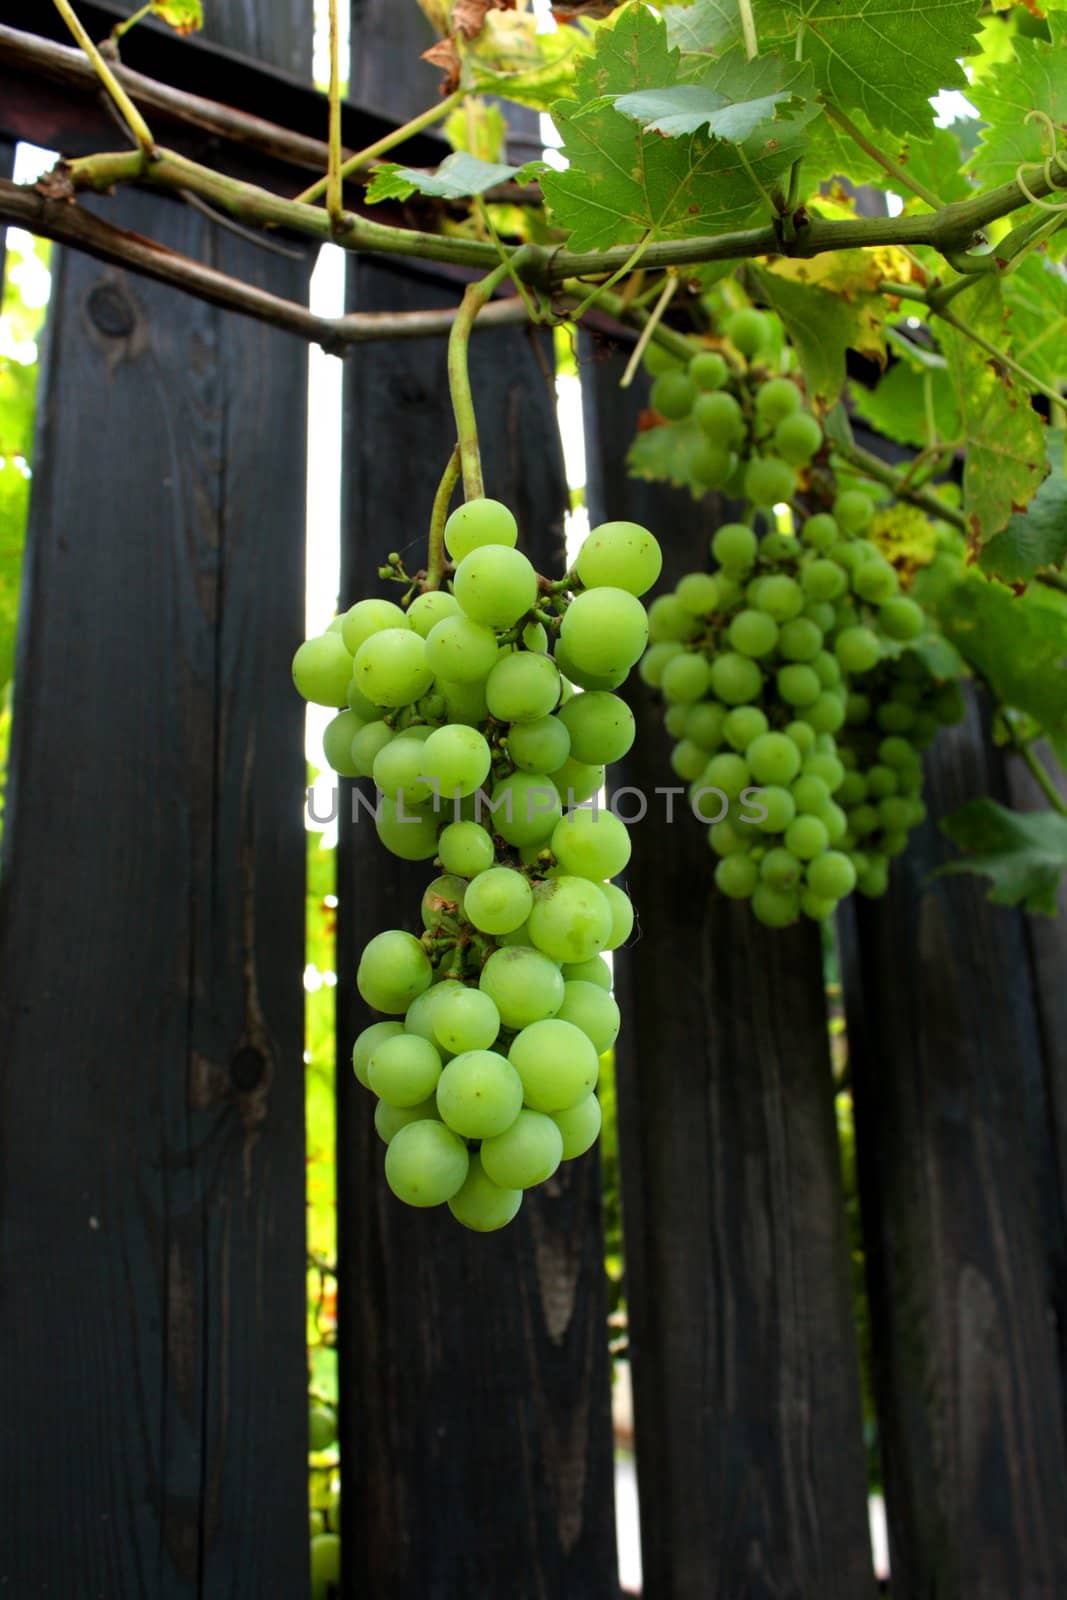 The green grape at the fence